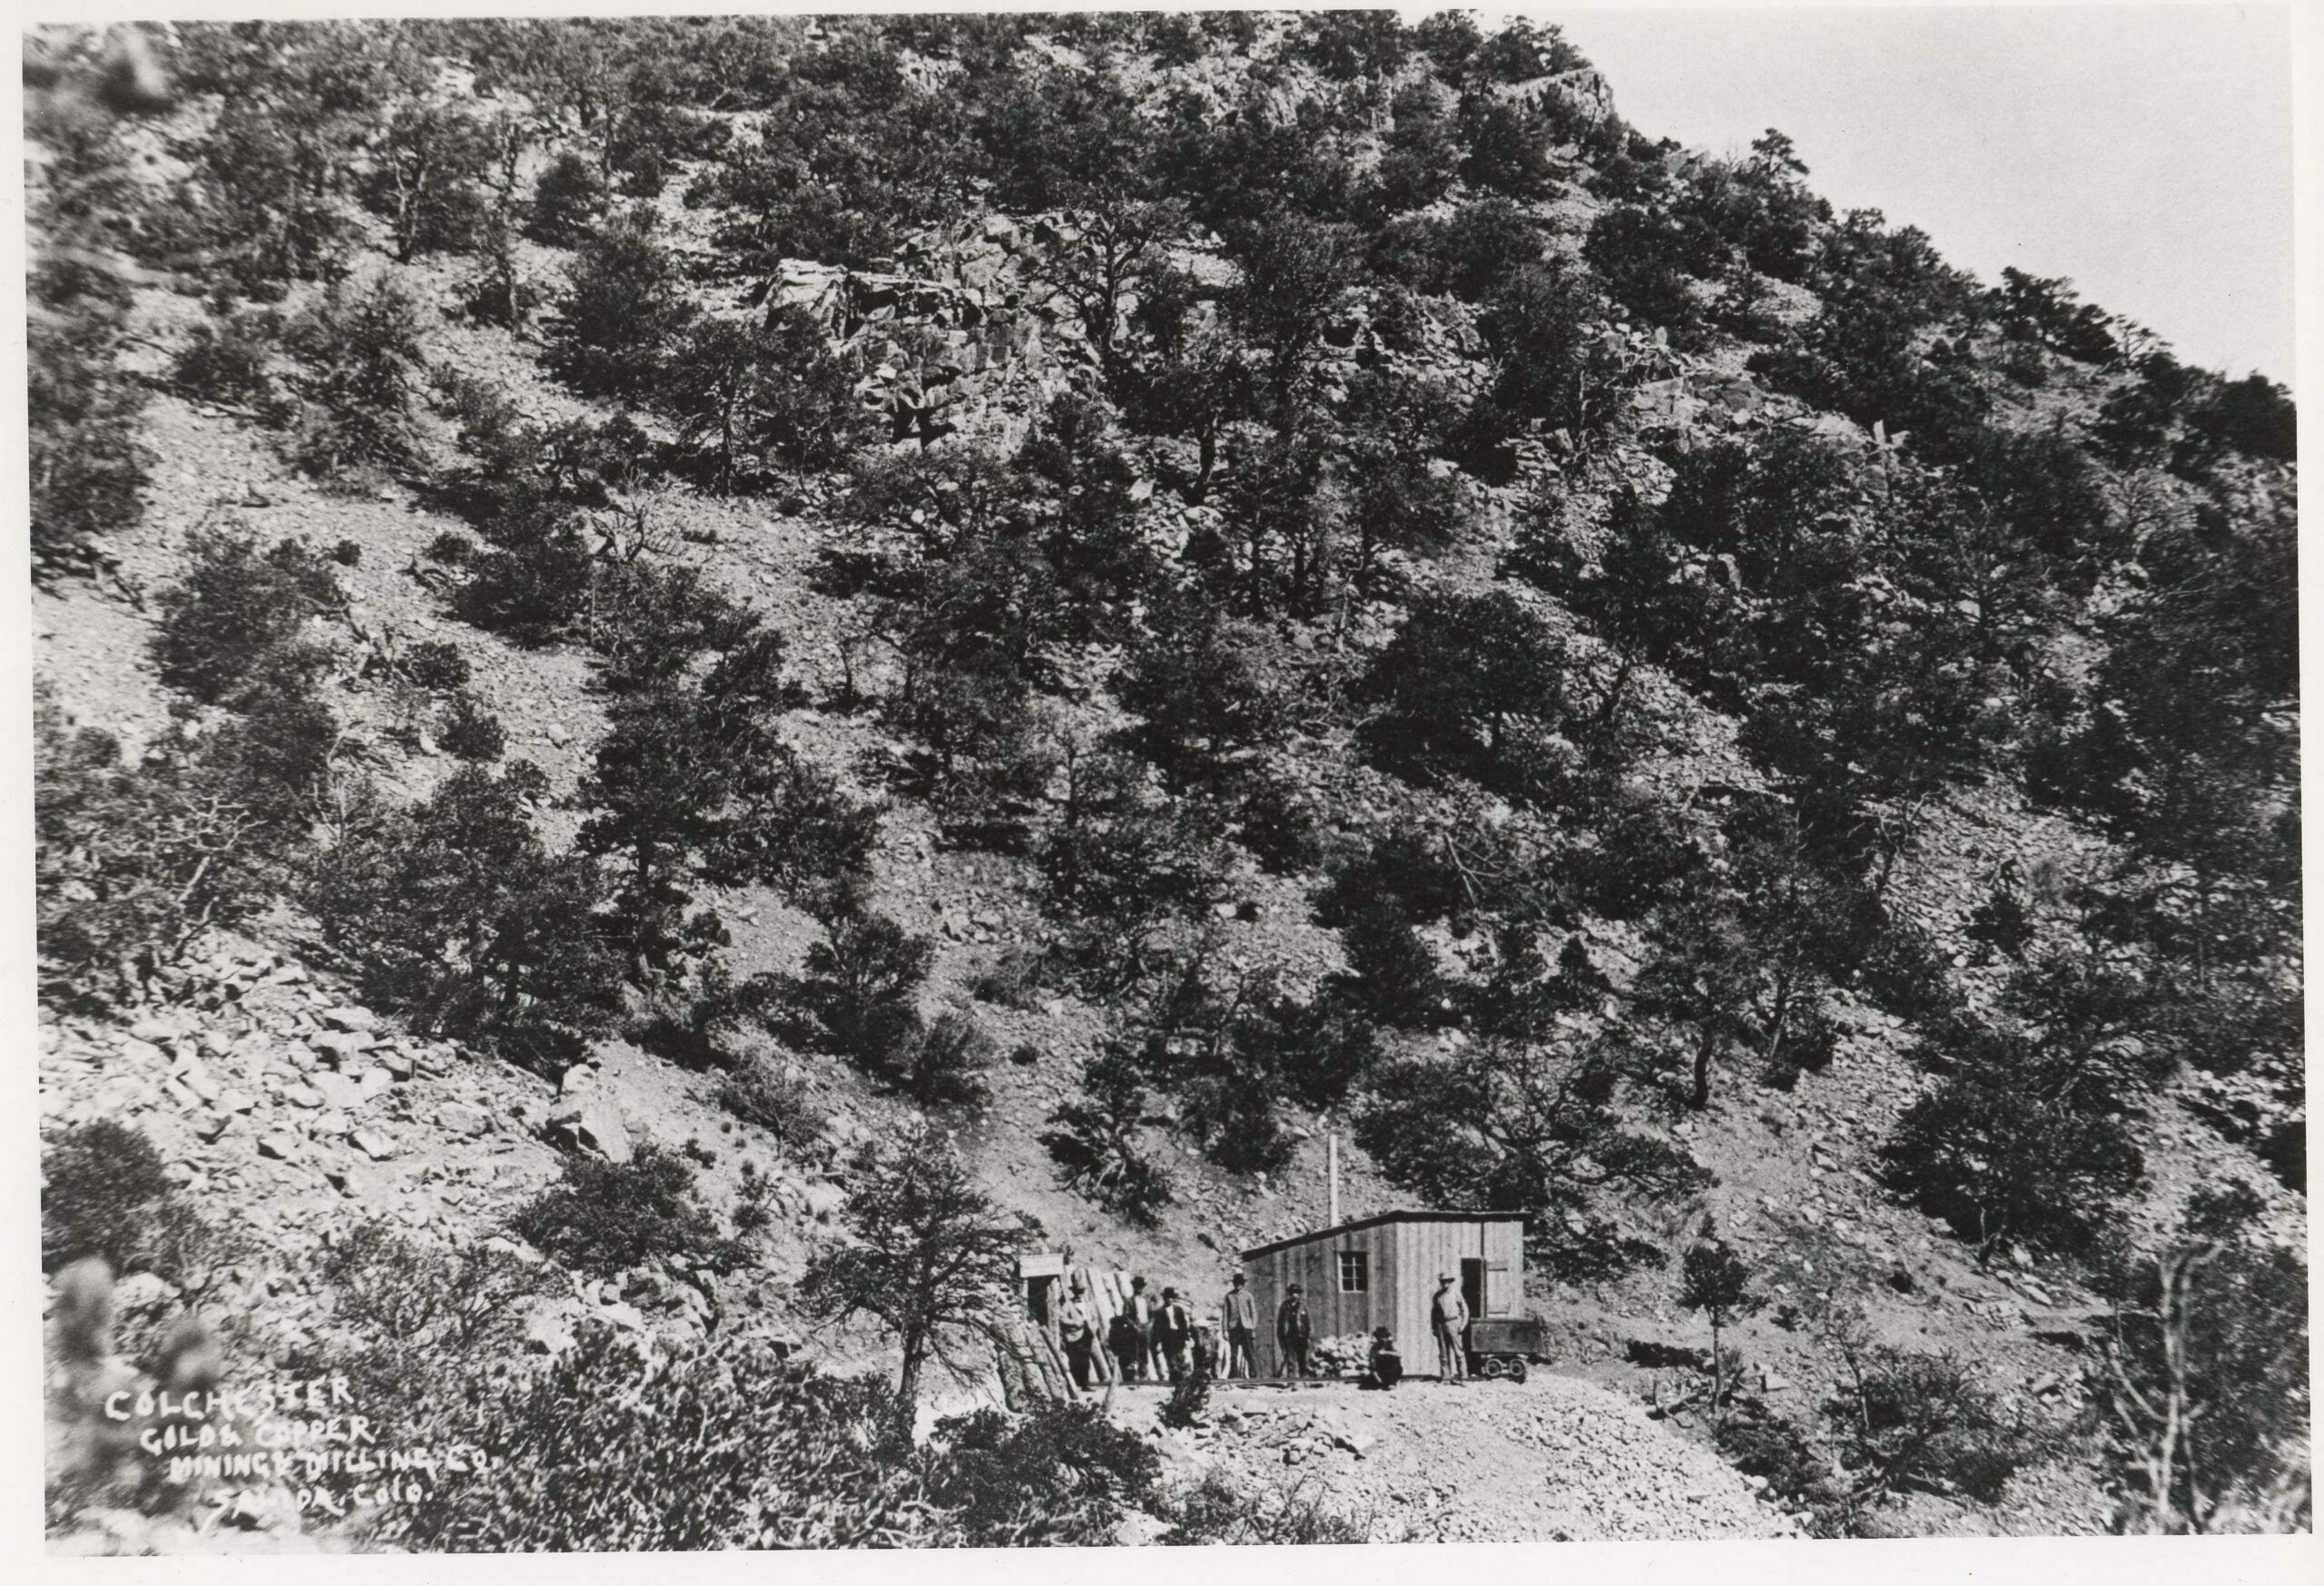 Increased mining activity – and some small financial successes in the late 1890’s – prompted a spate of prospecting by Salida businessmen and even a few children. They swarmed up the gulches northeast of town with picks, shovels and a little dynamite seeking “color.” They weren’t disappointed – at first – because they found showings of gold, silver, copper and lead. For a time during the winter of 1895-96, many businesses closed early so proprietors could go “mining.” One of those efforts was the Colchester Mining and Milling Company, which dug two tunnels – No. 1 above – into the side of the mountain between Cleora and the mouth of today’s Longfellow Gulch. No. 1 tunnel is just above the level of the D&RG mainline and about 100 yards away on a “gentle slope, just right for men pushing loaded ore cars to the railroad,” according to a Salida Mail article. Tunnel No. 2 is a few hundred feet above and a little east of the discovery opening. Plans were to connect the two inside the mountain, but ore ran out before then.  (1)